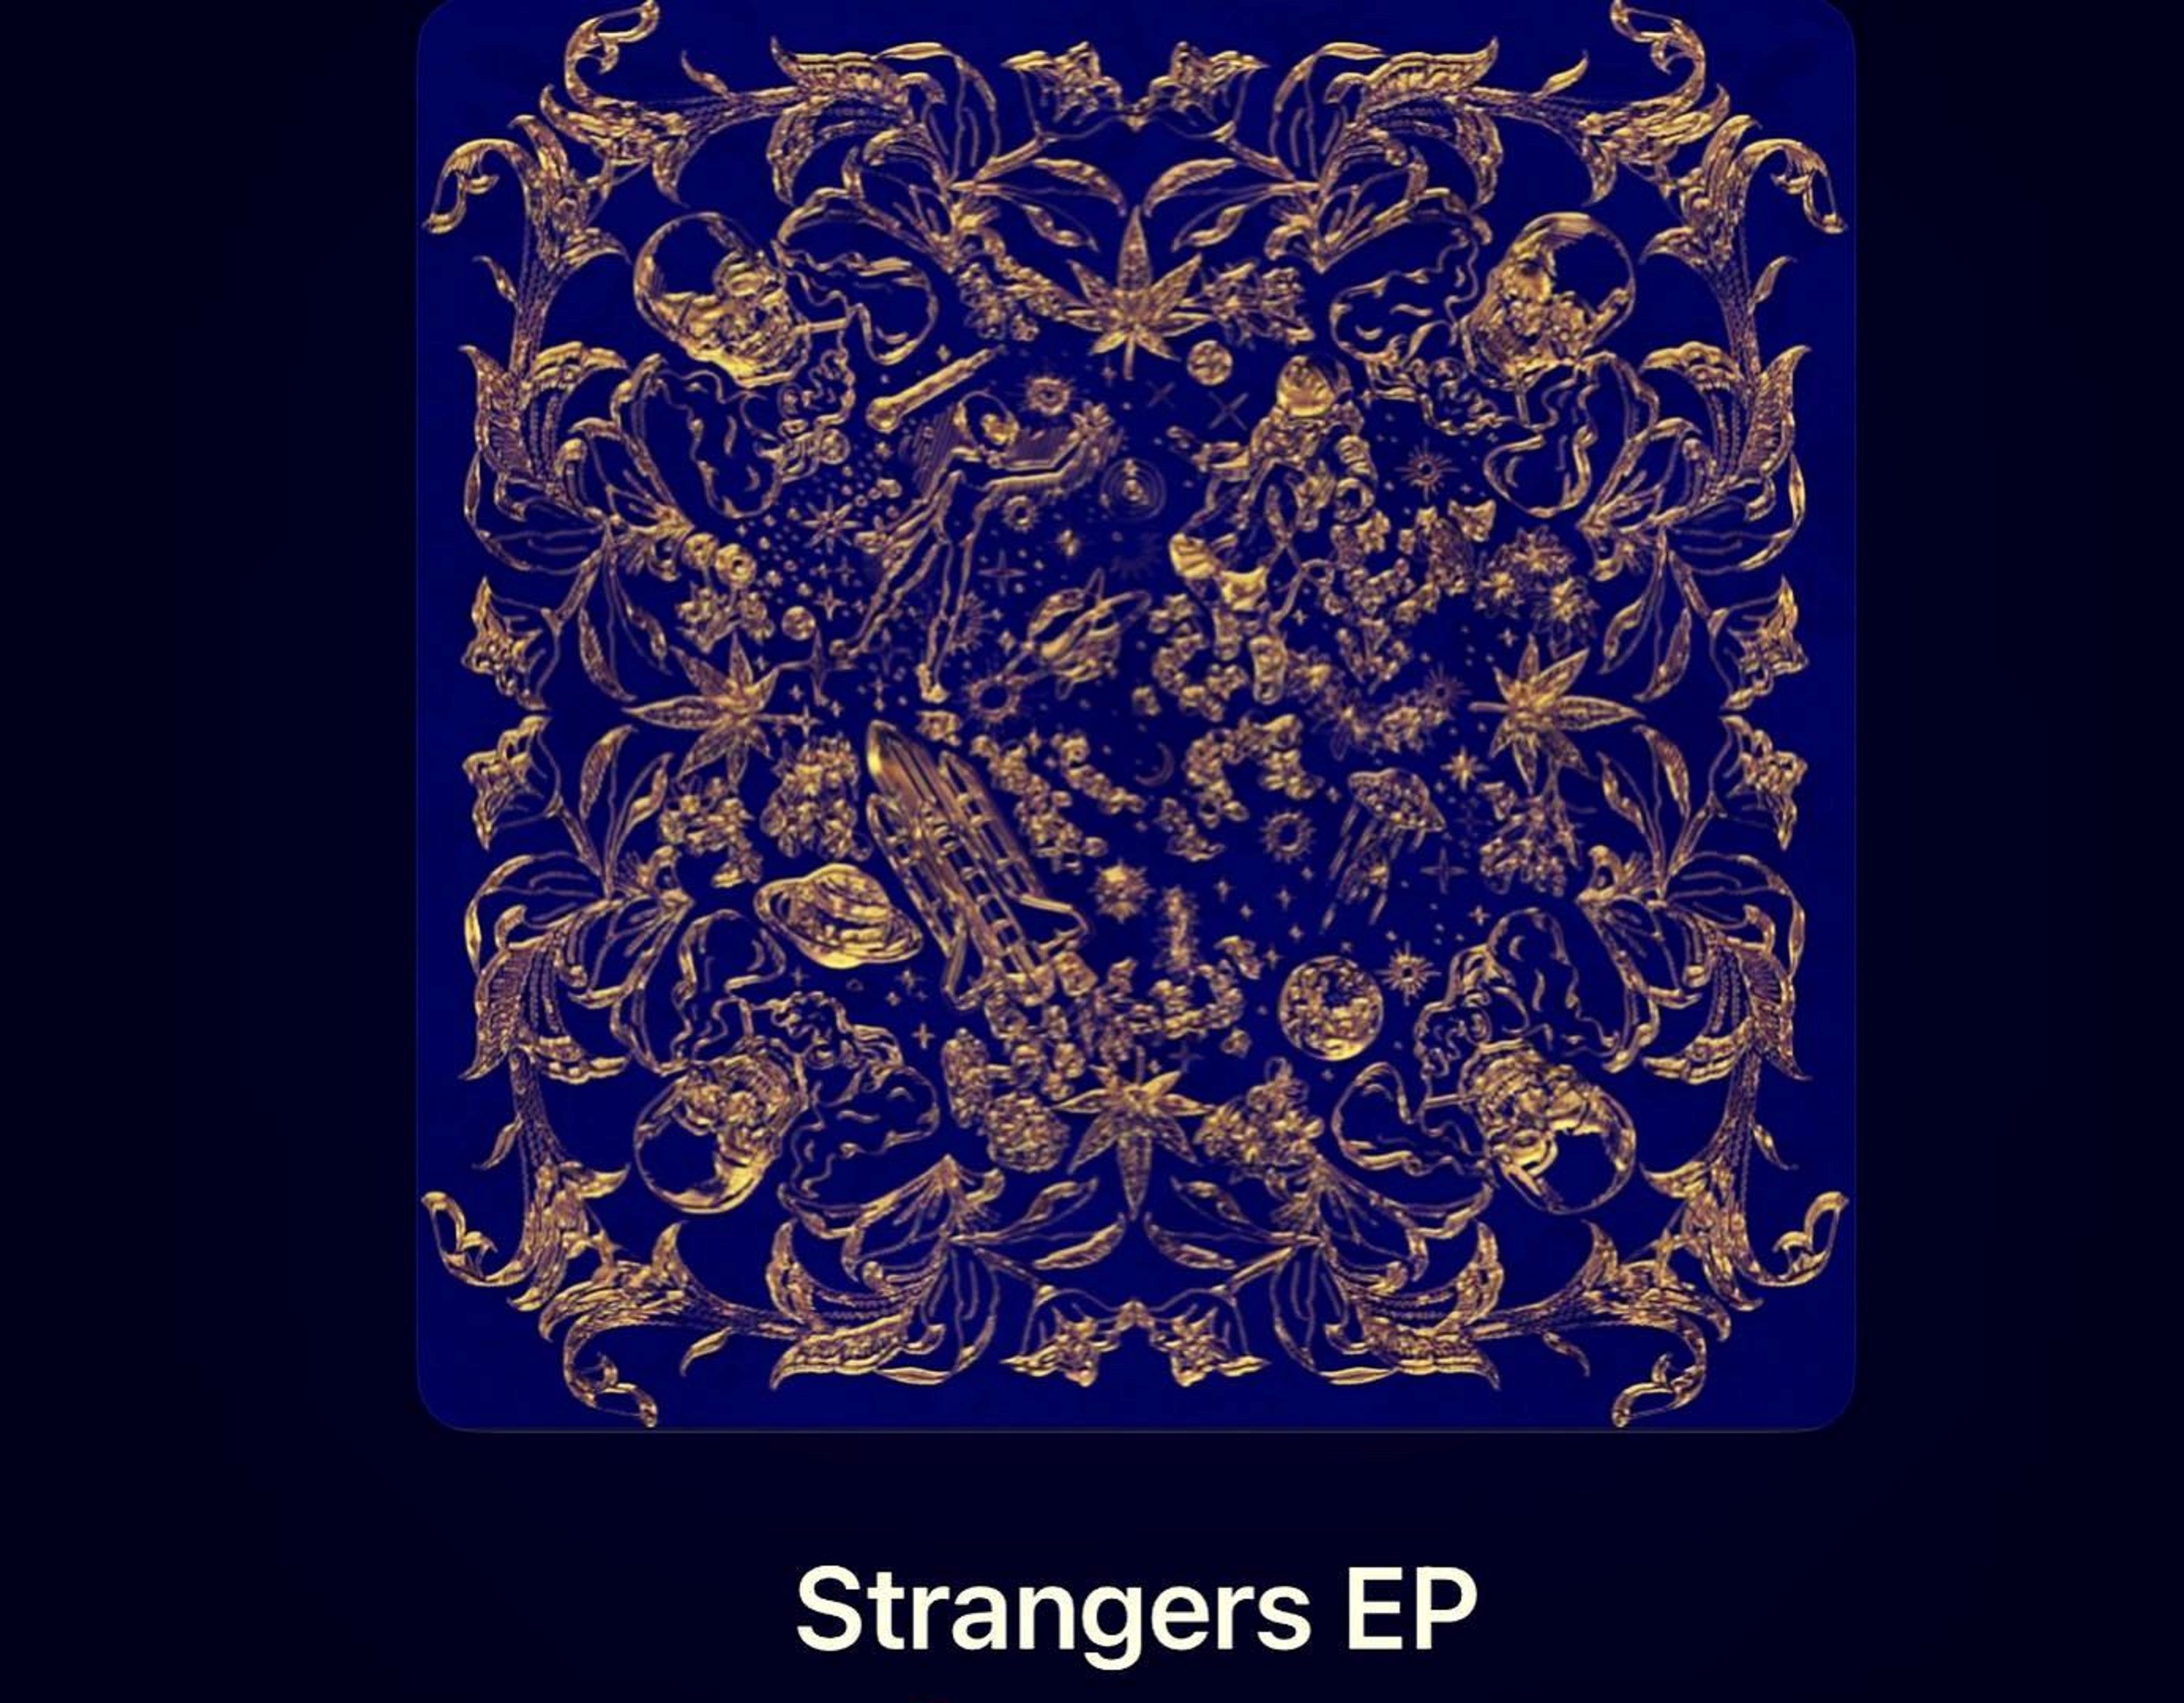 Tommy Weeks just released new EP, "Strangers"